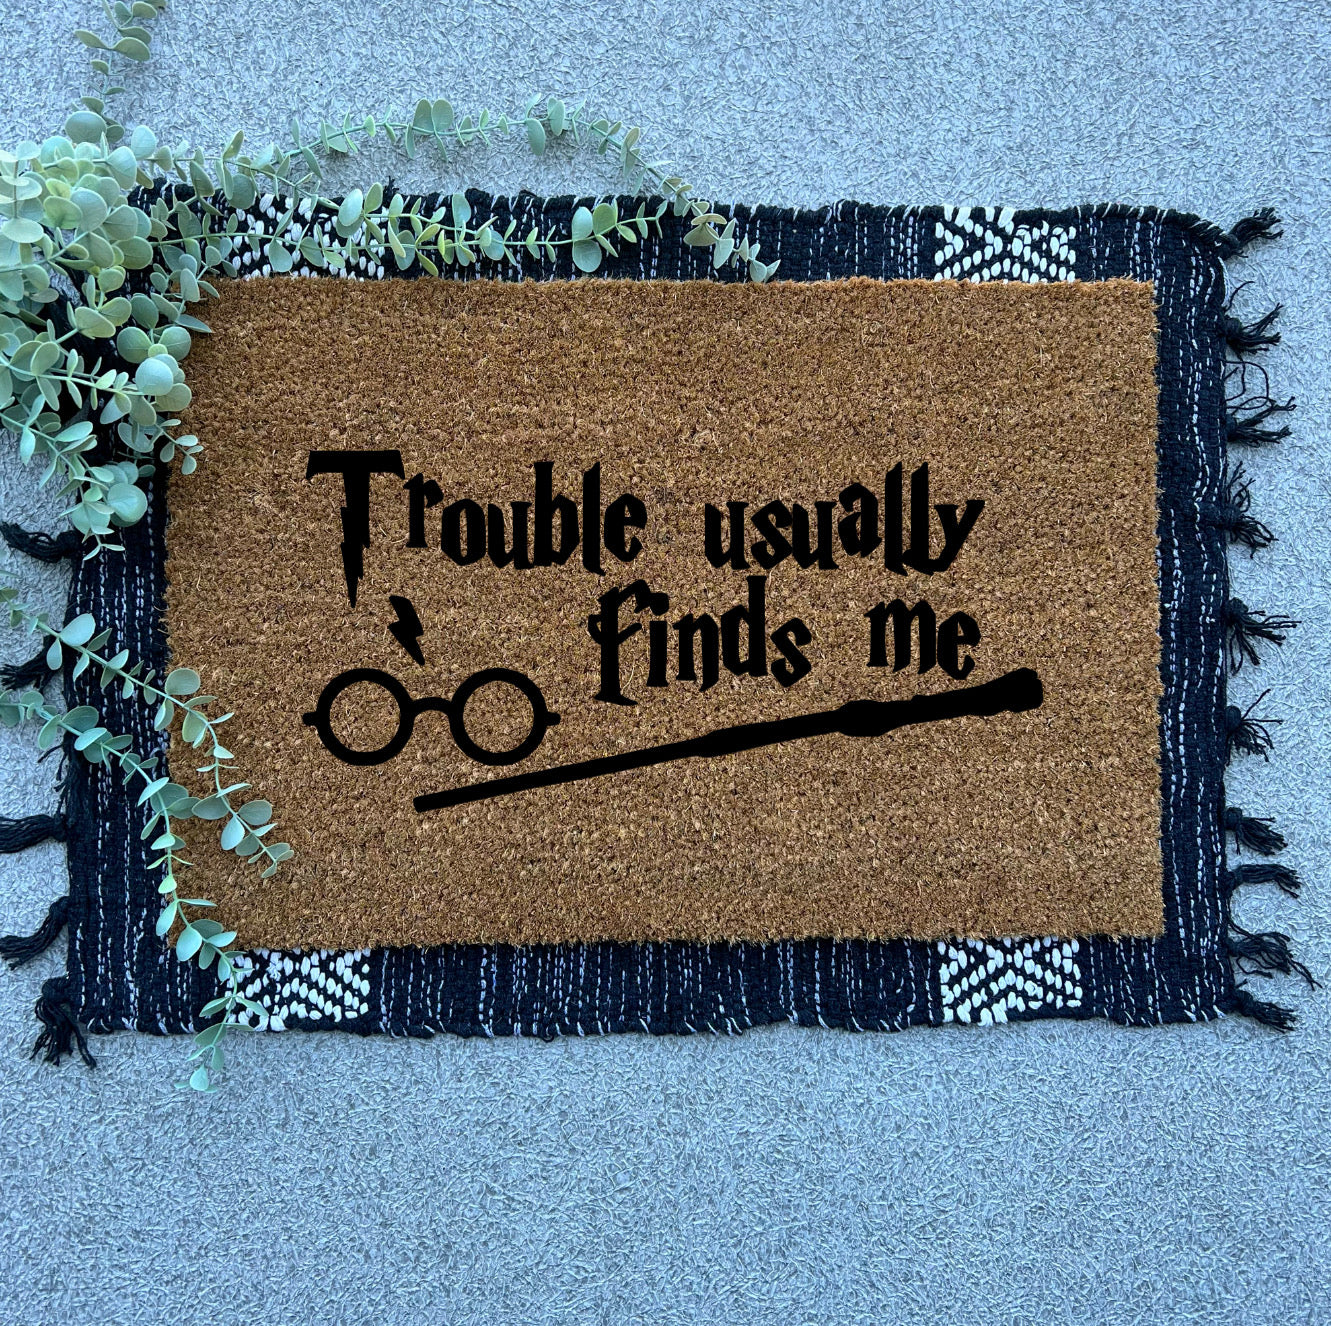 (Harry Potter) Trouble Usually Finds Me